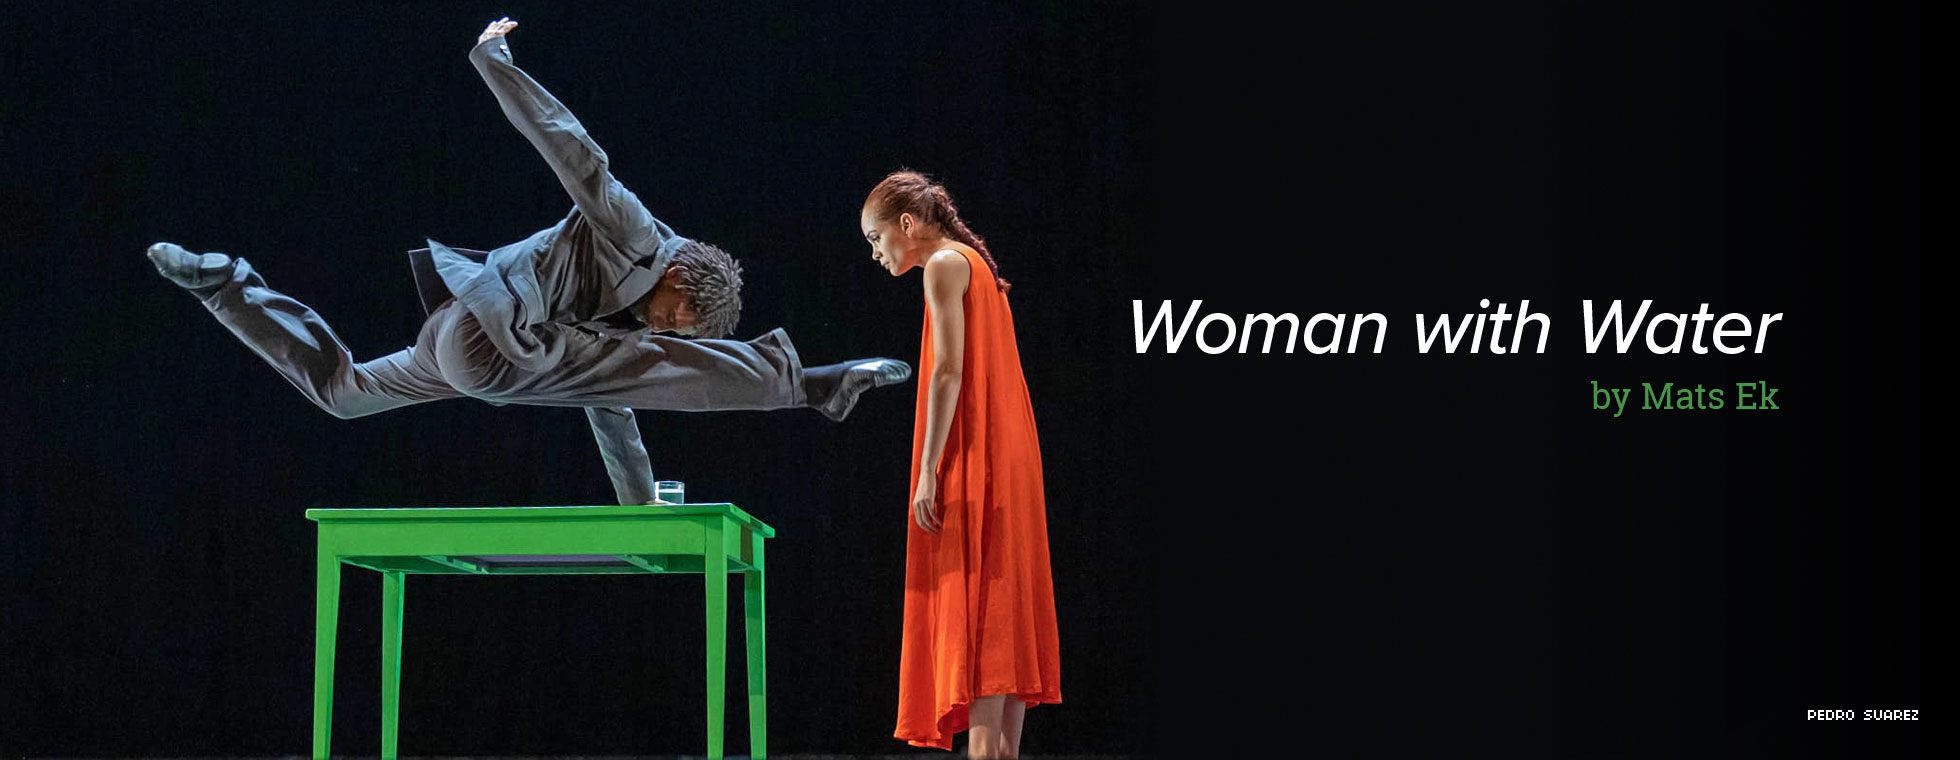 In a scene from “Woman with Water,” by Mats Ek, a dancer using one hand to hold himself above and parallel to a table stretches both legs in opposite directions while a woman stands and watches. 